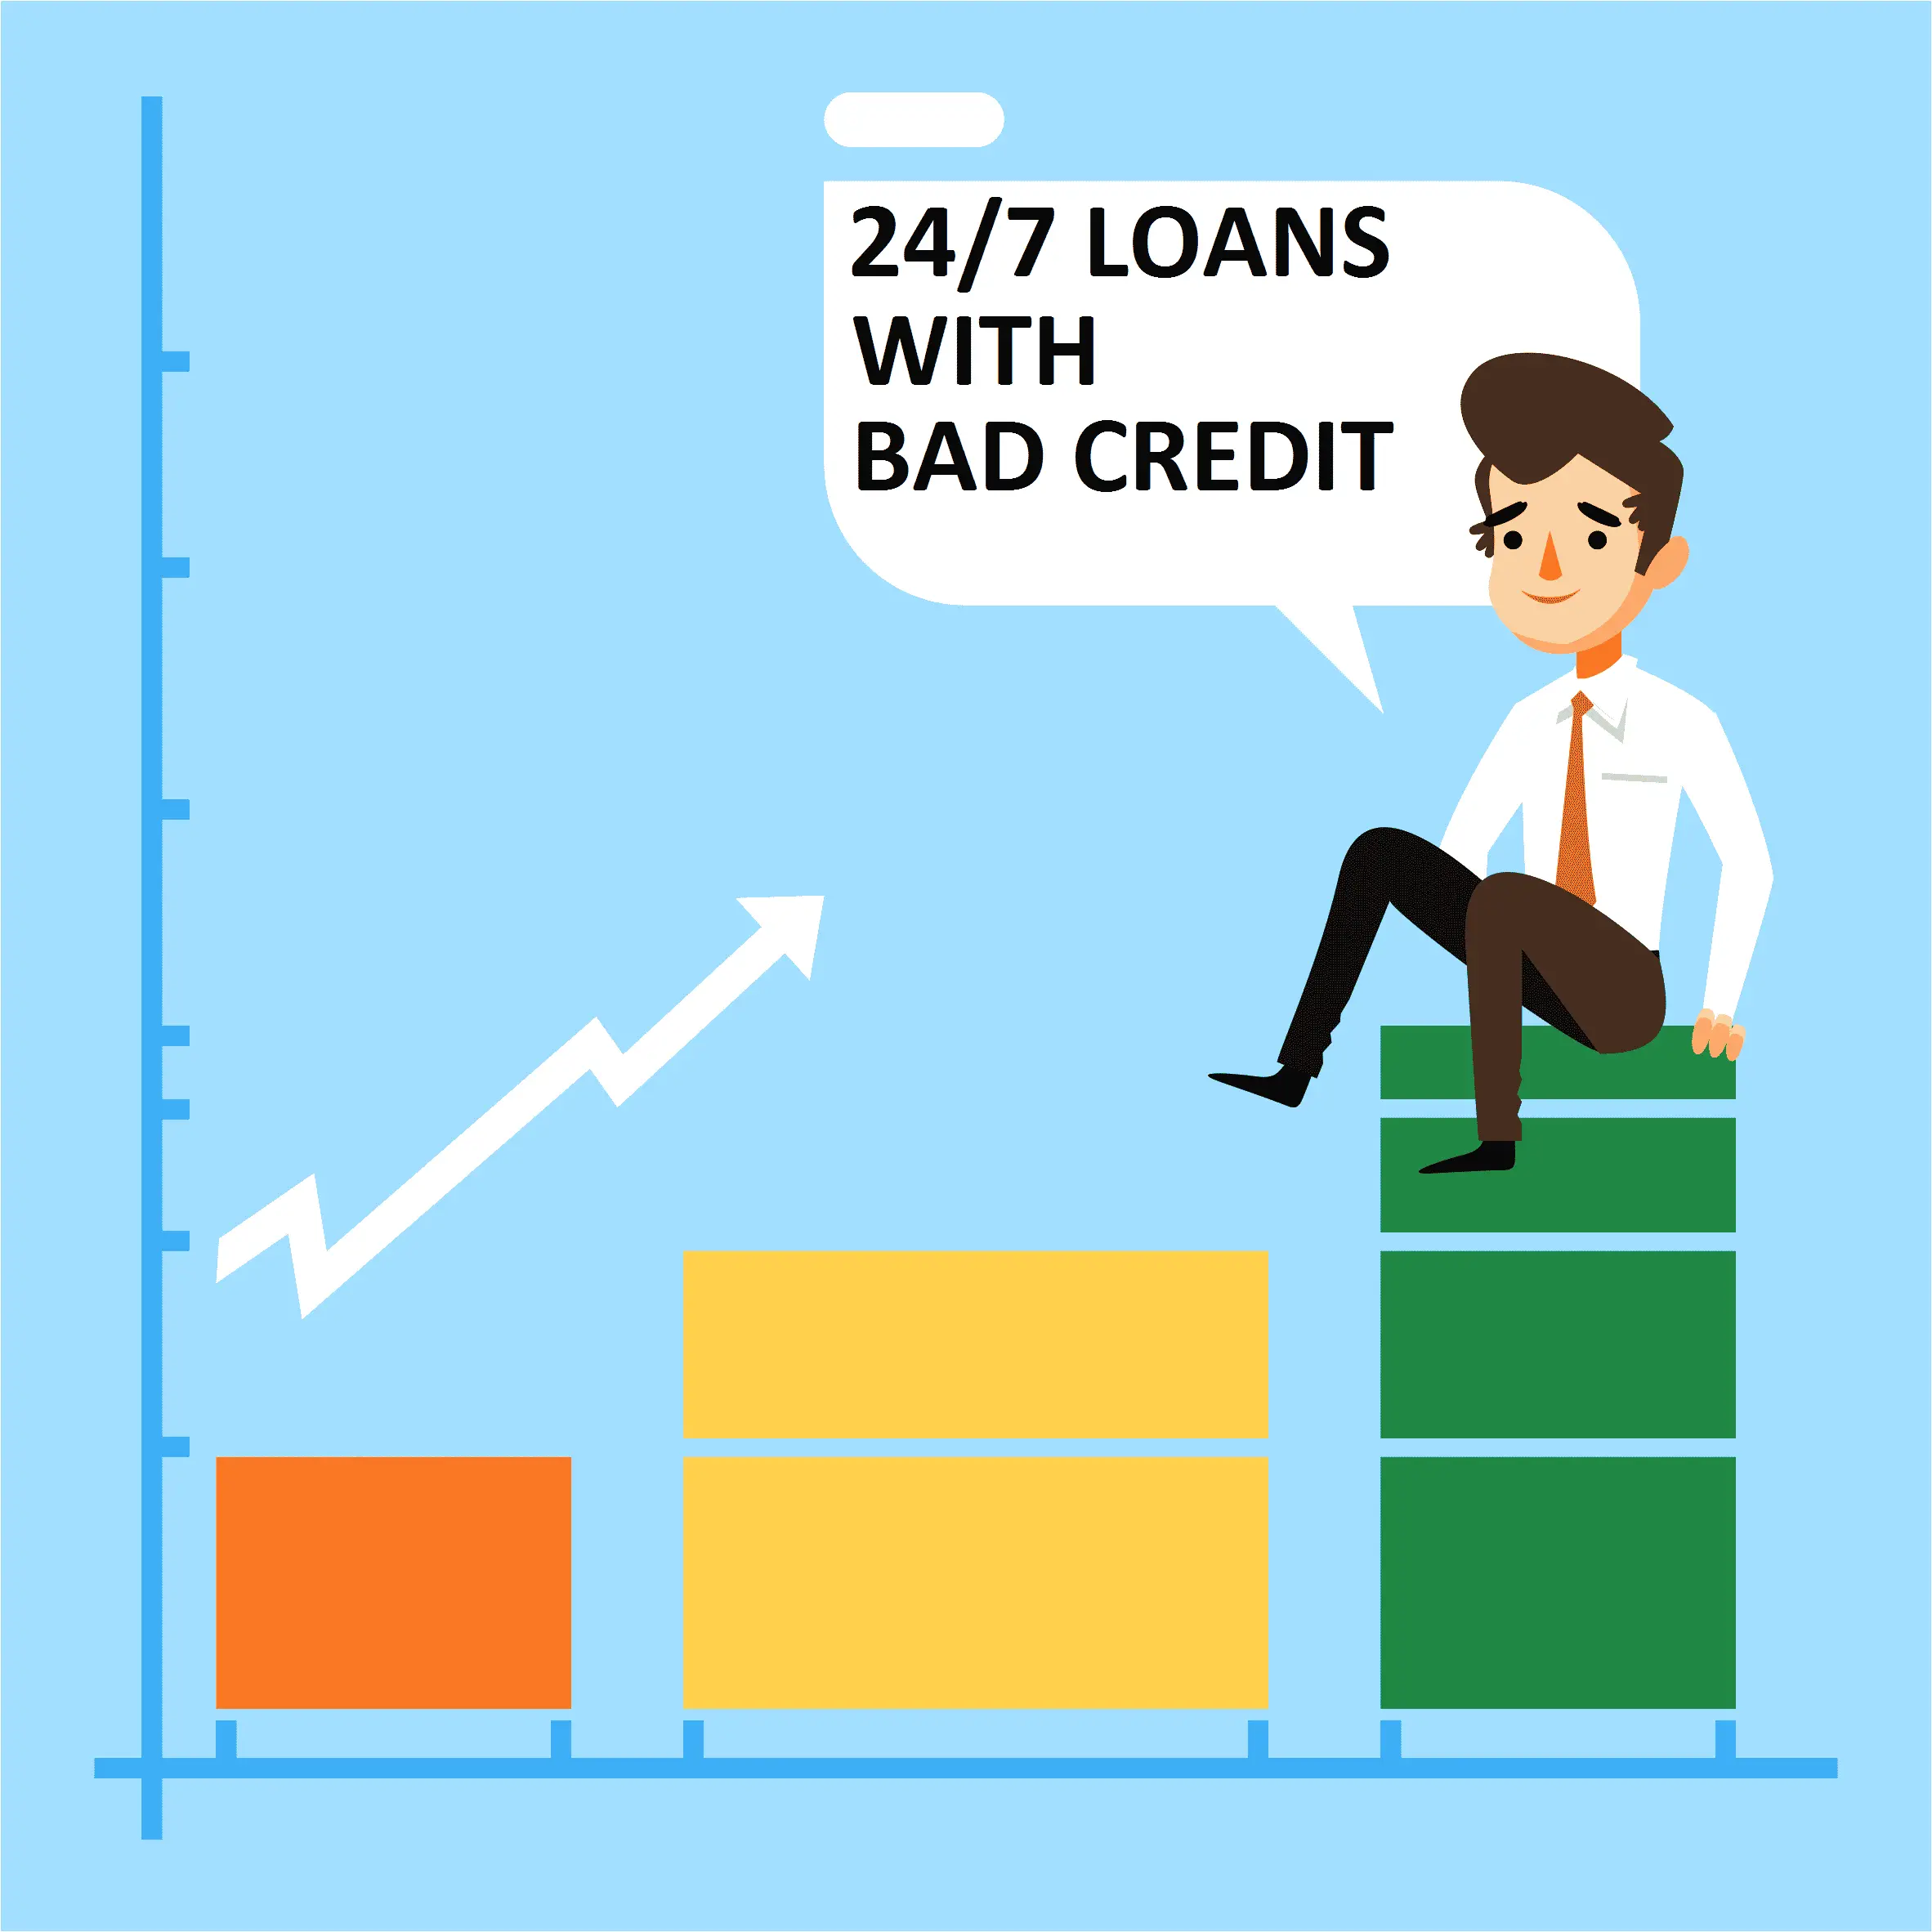 24/7 Loans With Bad Credit